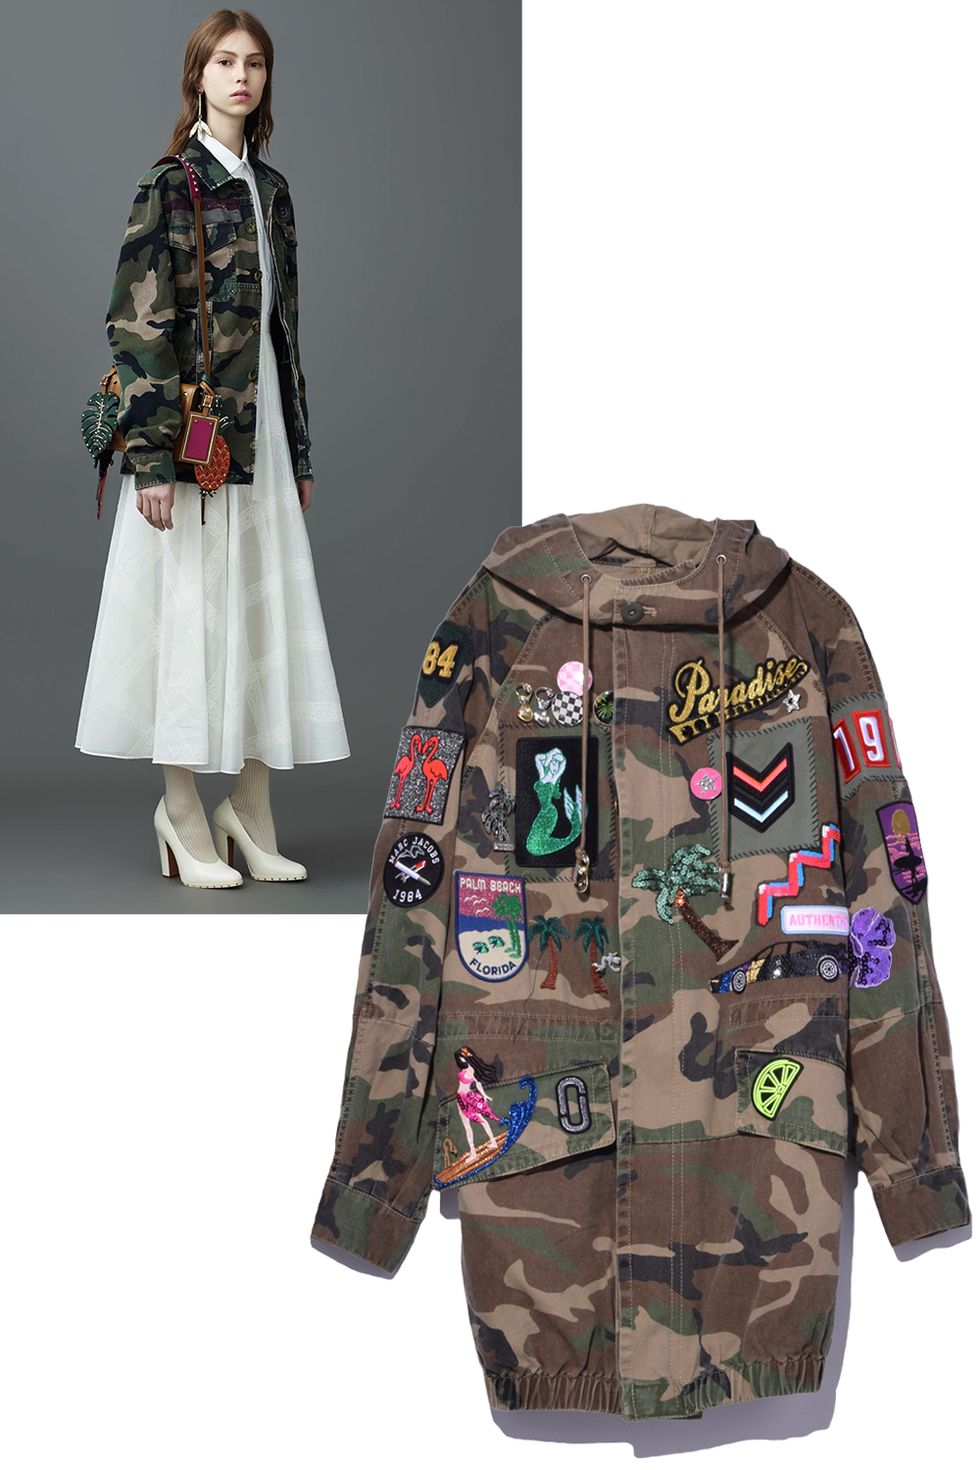 <p>«Il cappotto con stampa militare di <strong data-redactor-tag="strong" data-verified="redactor">Valentino</strong> è indispensabile per la moda 2017»<span class="redactor-invisible-space" data-verified="redactor" data-redactor-tag="span" data-redactor-class="redactor-invisible-space"></span>,&nbsp;<span class="redactor-invisible-space" data-verified="redactor" data-redactor-tag="span" data-redactor-class="redactor-invisible-space">editor&nbsp;Mallory Schlau.&nbsp;</span></p><p><span class="redactor-invisible-space" data-verified="redactor" data-redactor-tag="span" data-redactor-class="redactor-invisible-space"><em data-redactor-tag="em" data-verified="redactor"><br></em></span></p><p><span class="redactor-invisible-space" data-verified="redactor" data-redactor-tag="span" data-redactor-class="redactor-invisible-space">Giubbotto <strong data-redactor-tag="strong" data-verified="redactor">Marc Jacobs</strong>.</span></p>